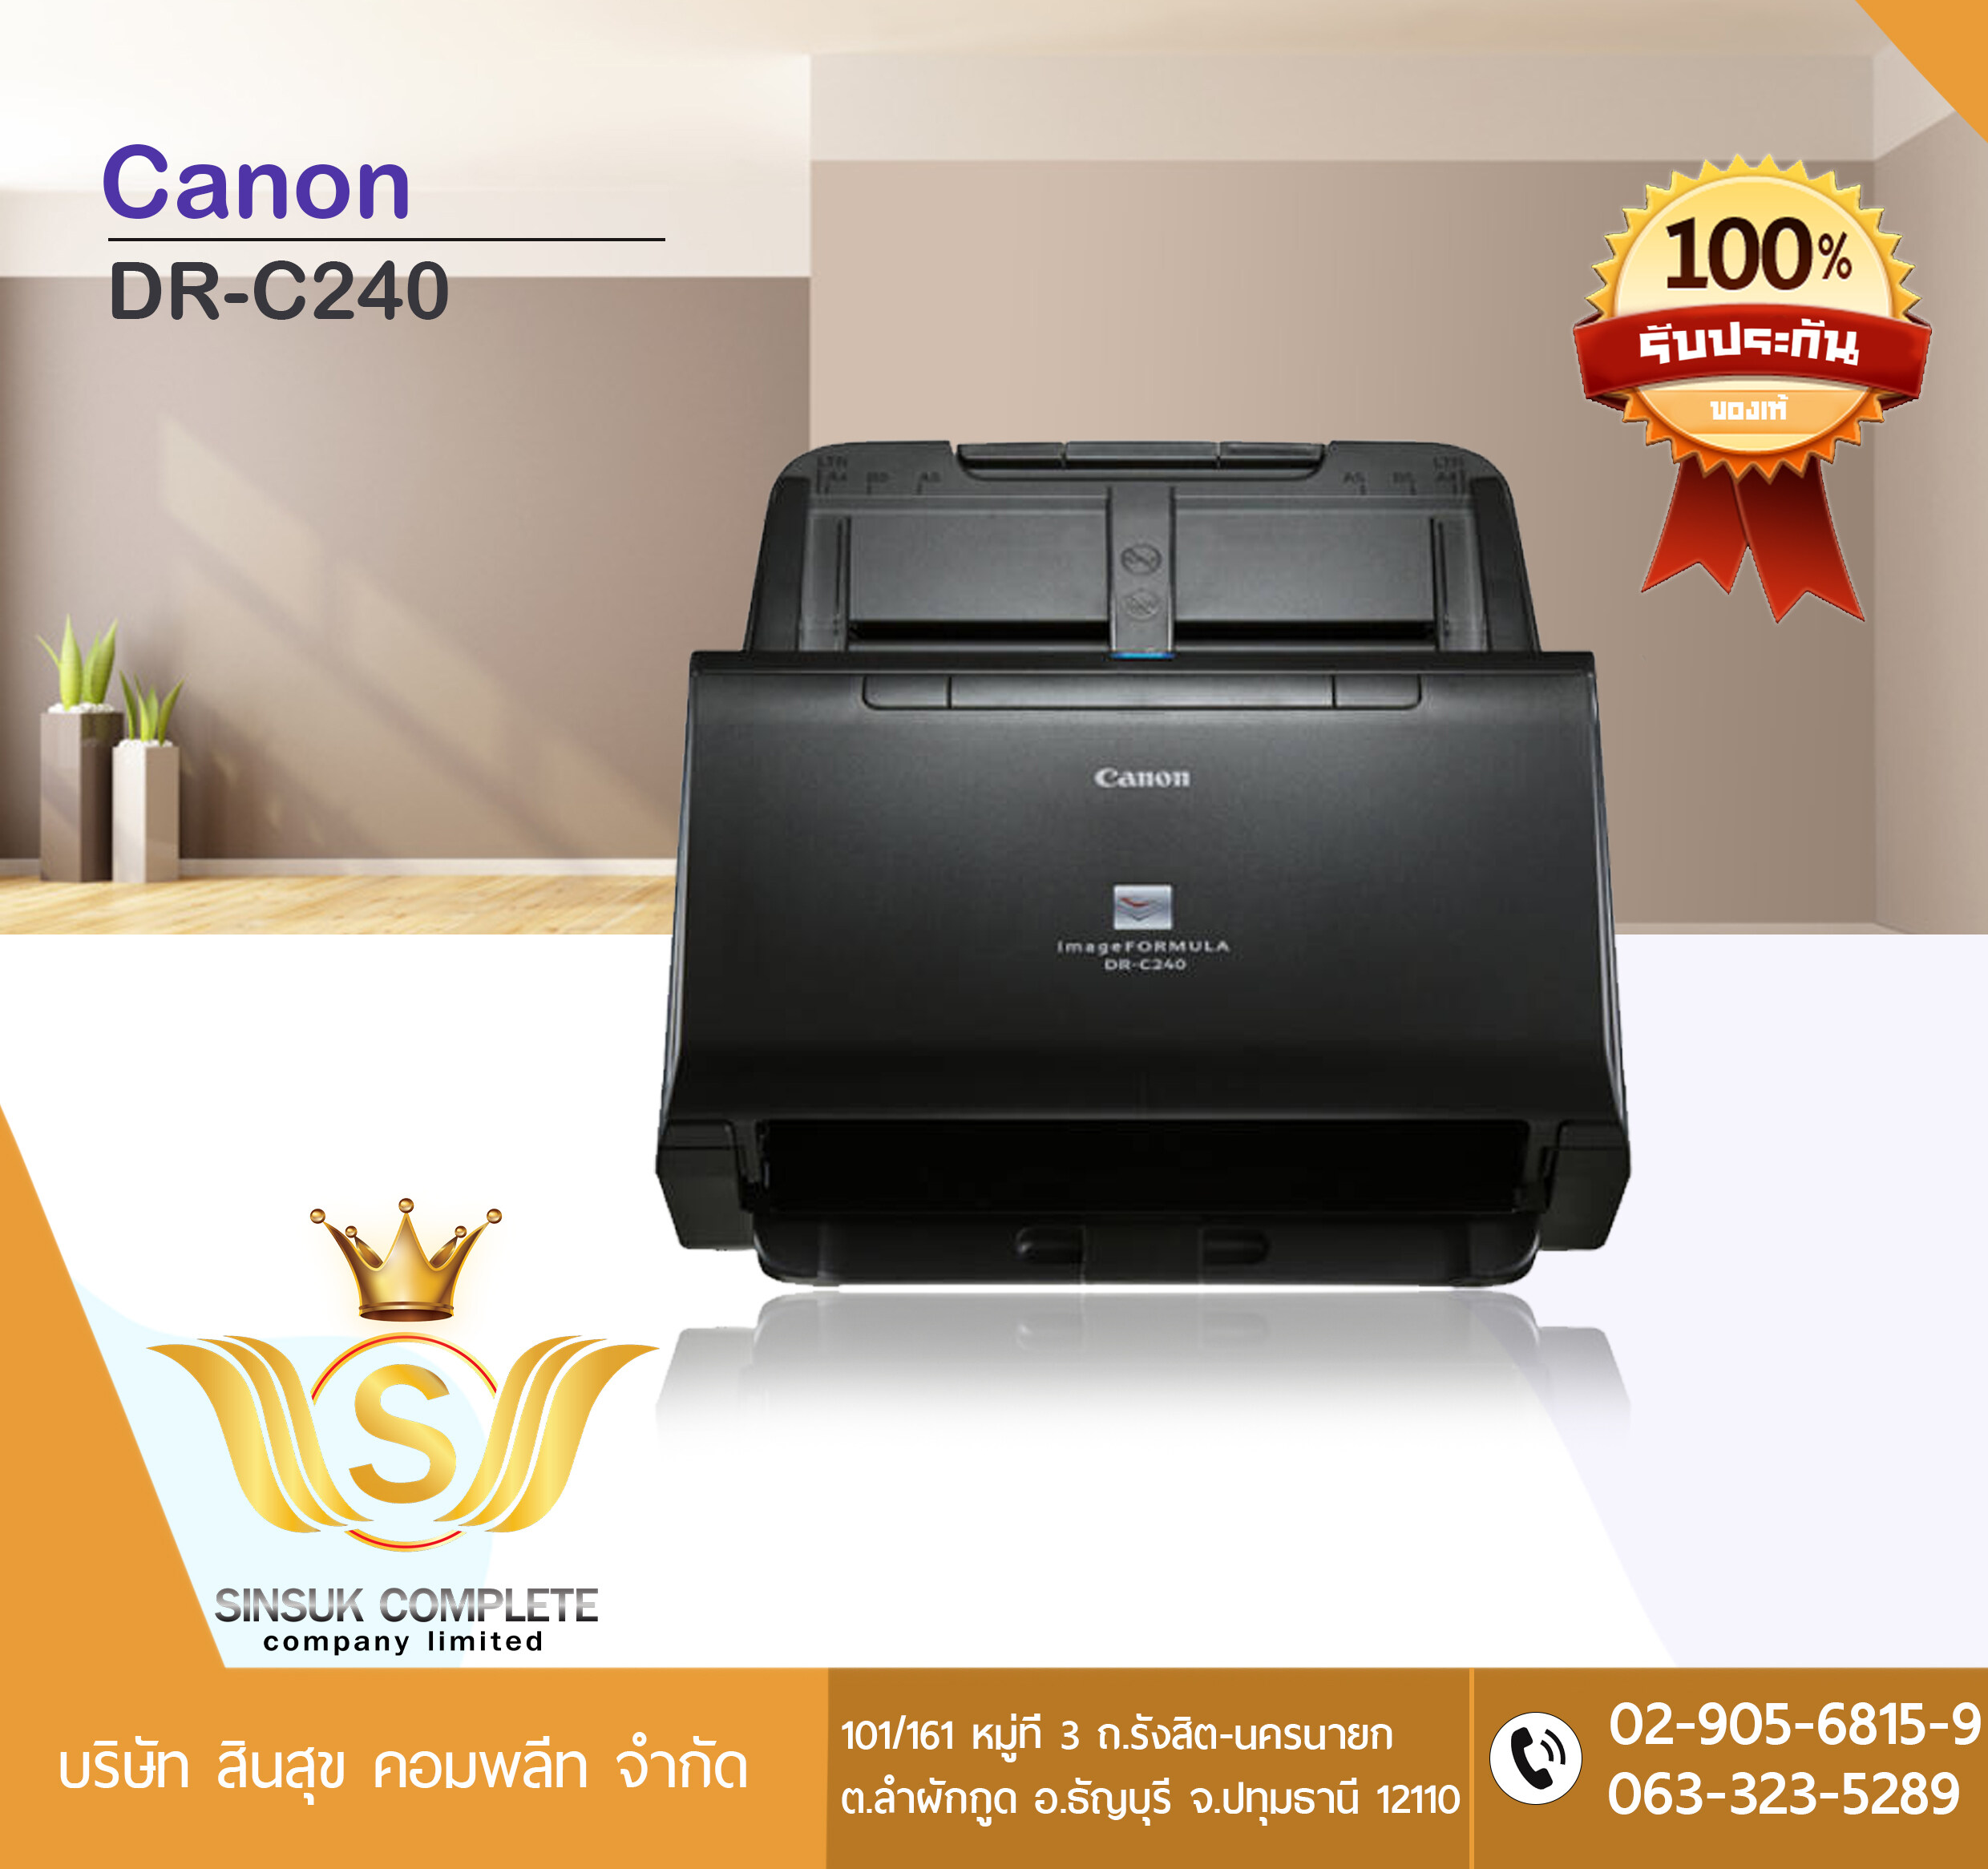 canon auto feed duplex scanners for mac